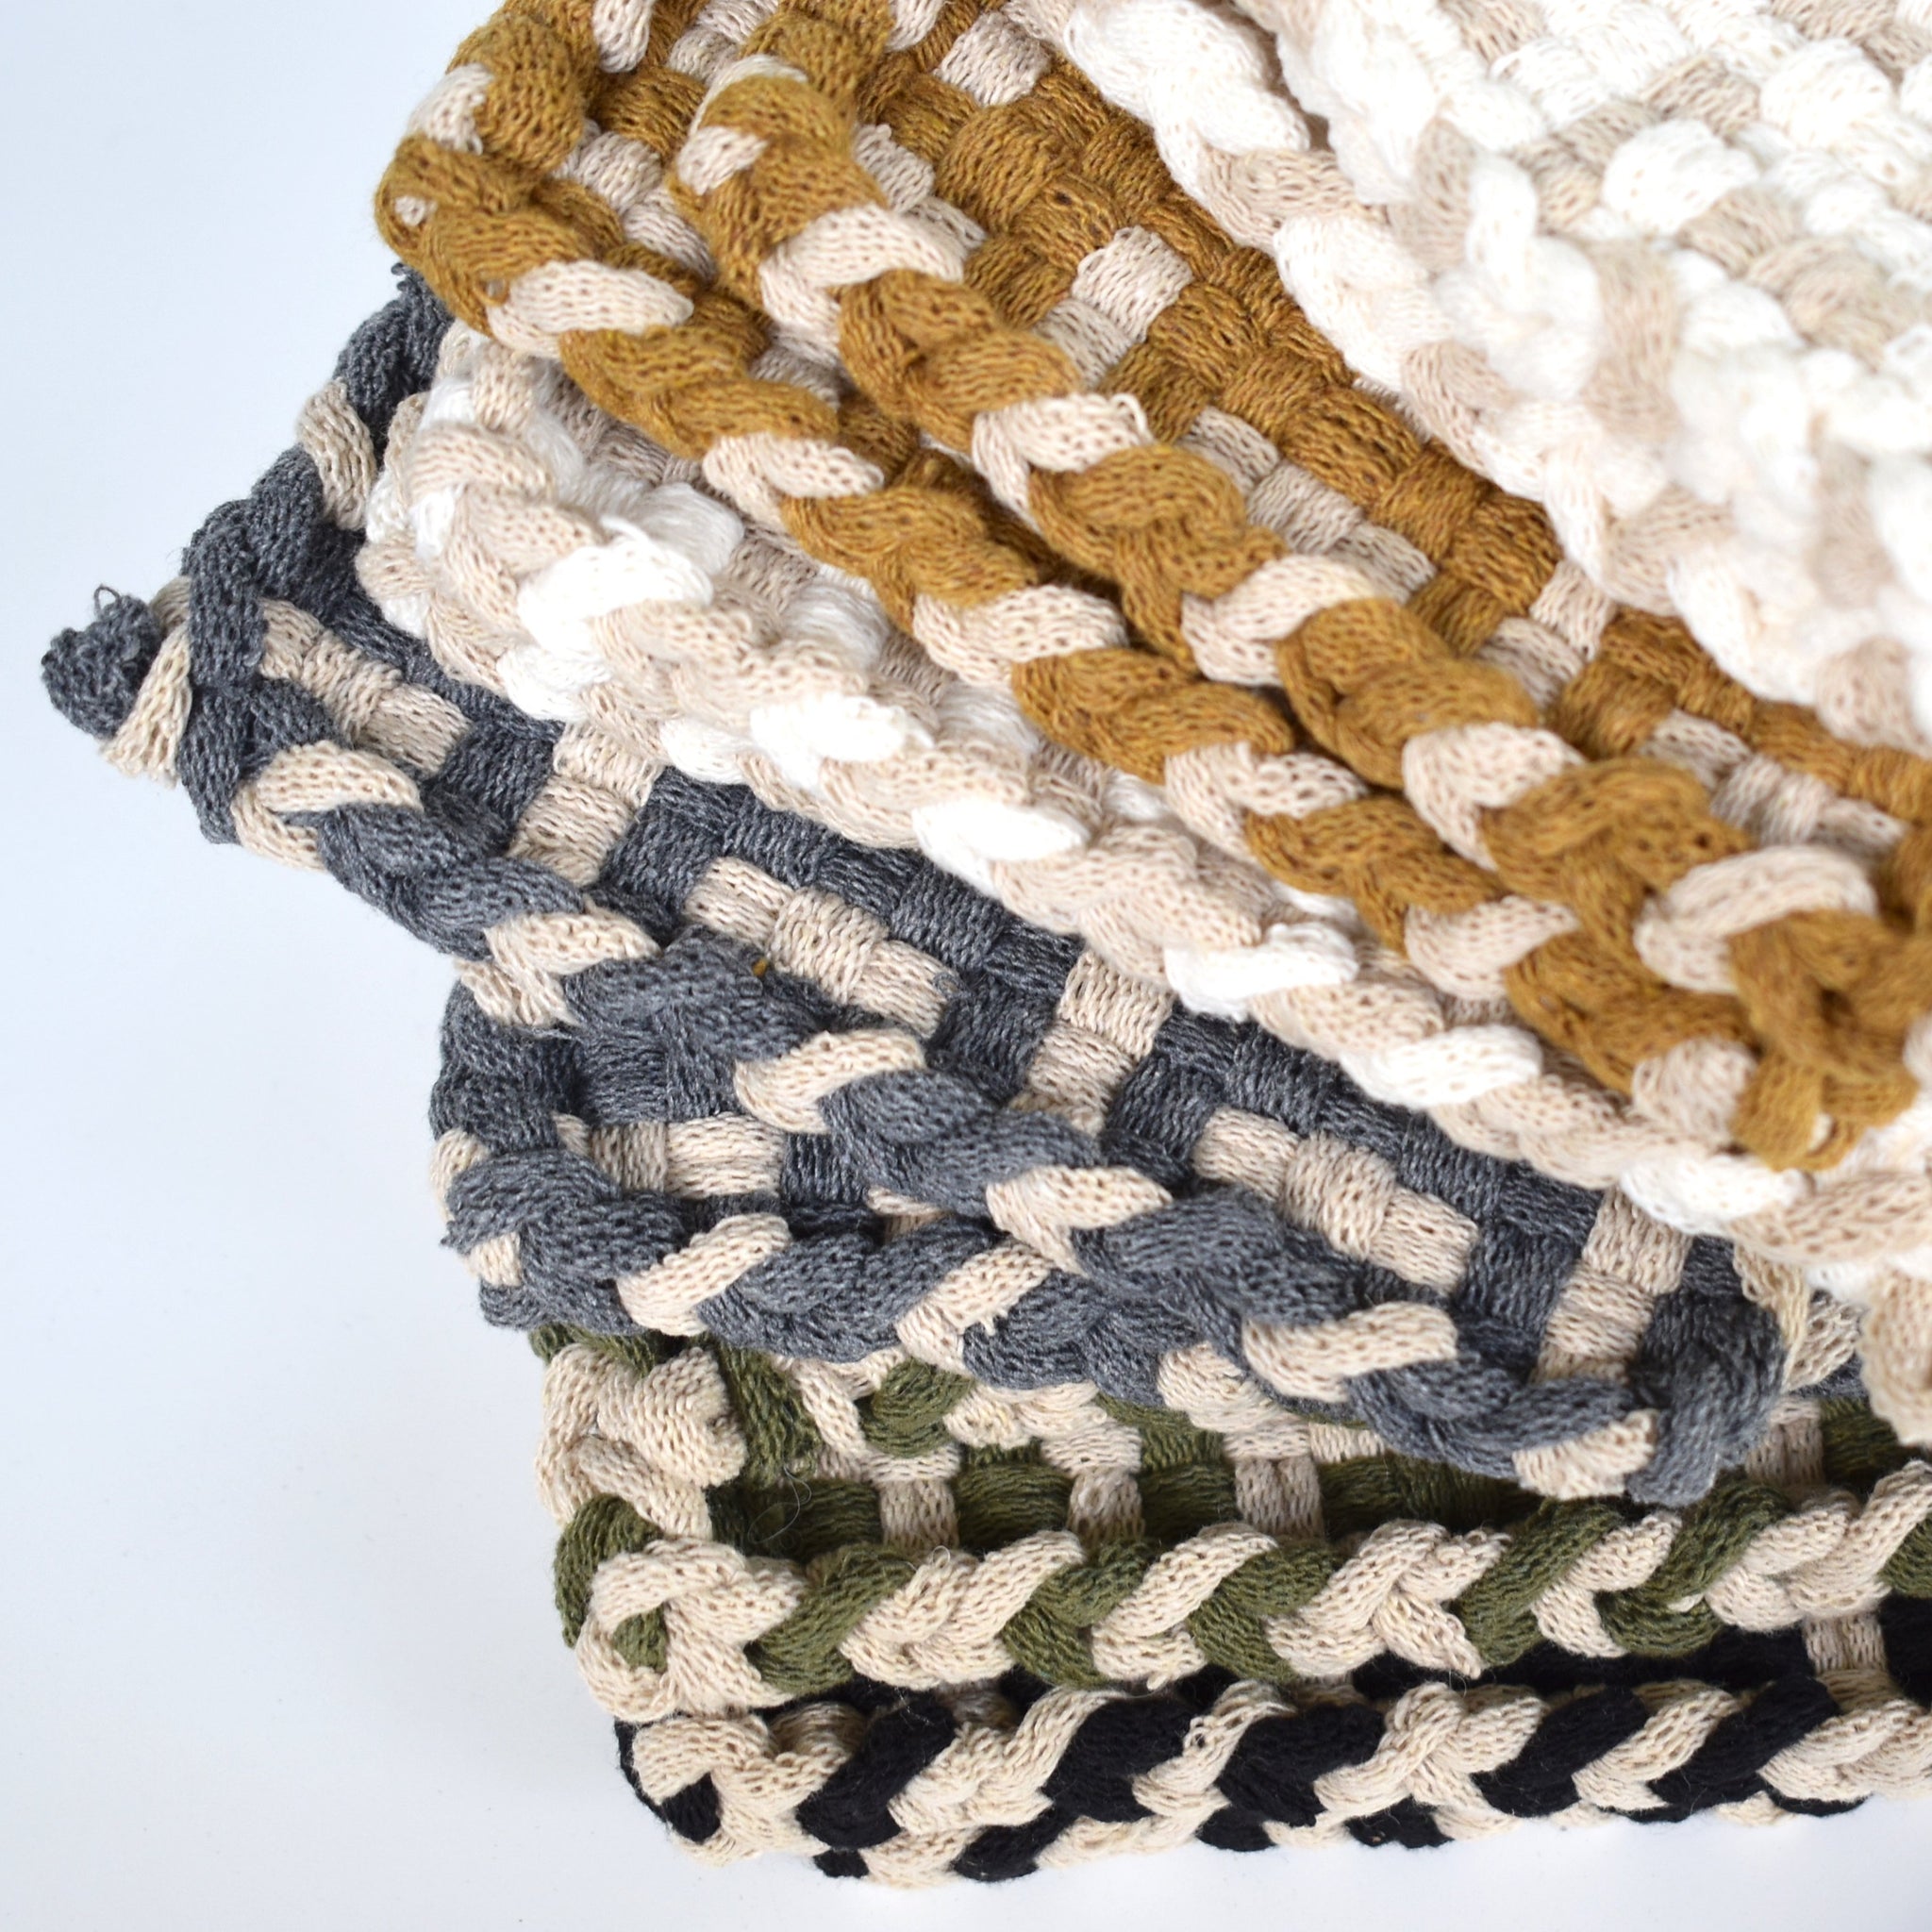 Woven Pot Holder - BIG PICTURE